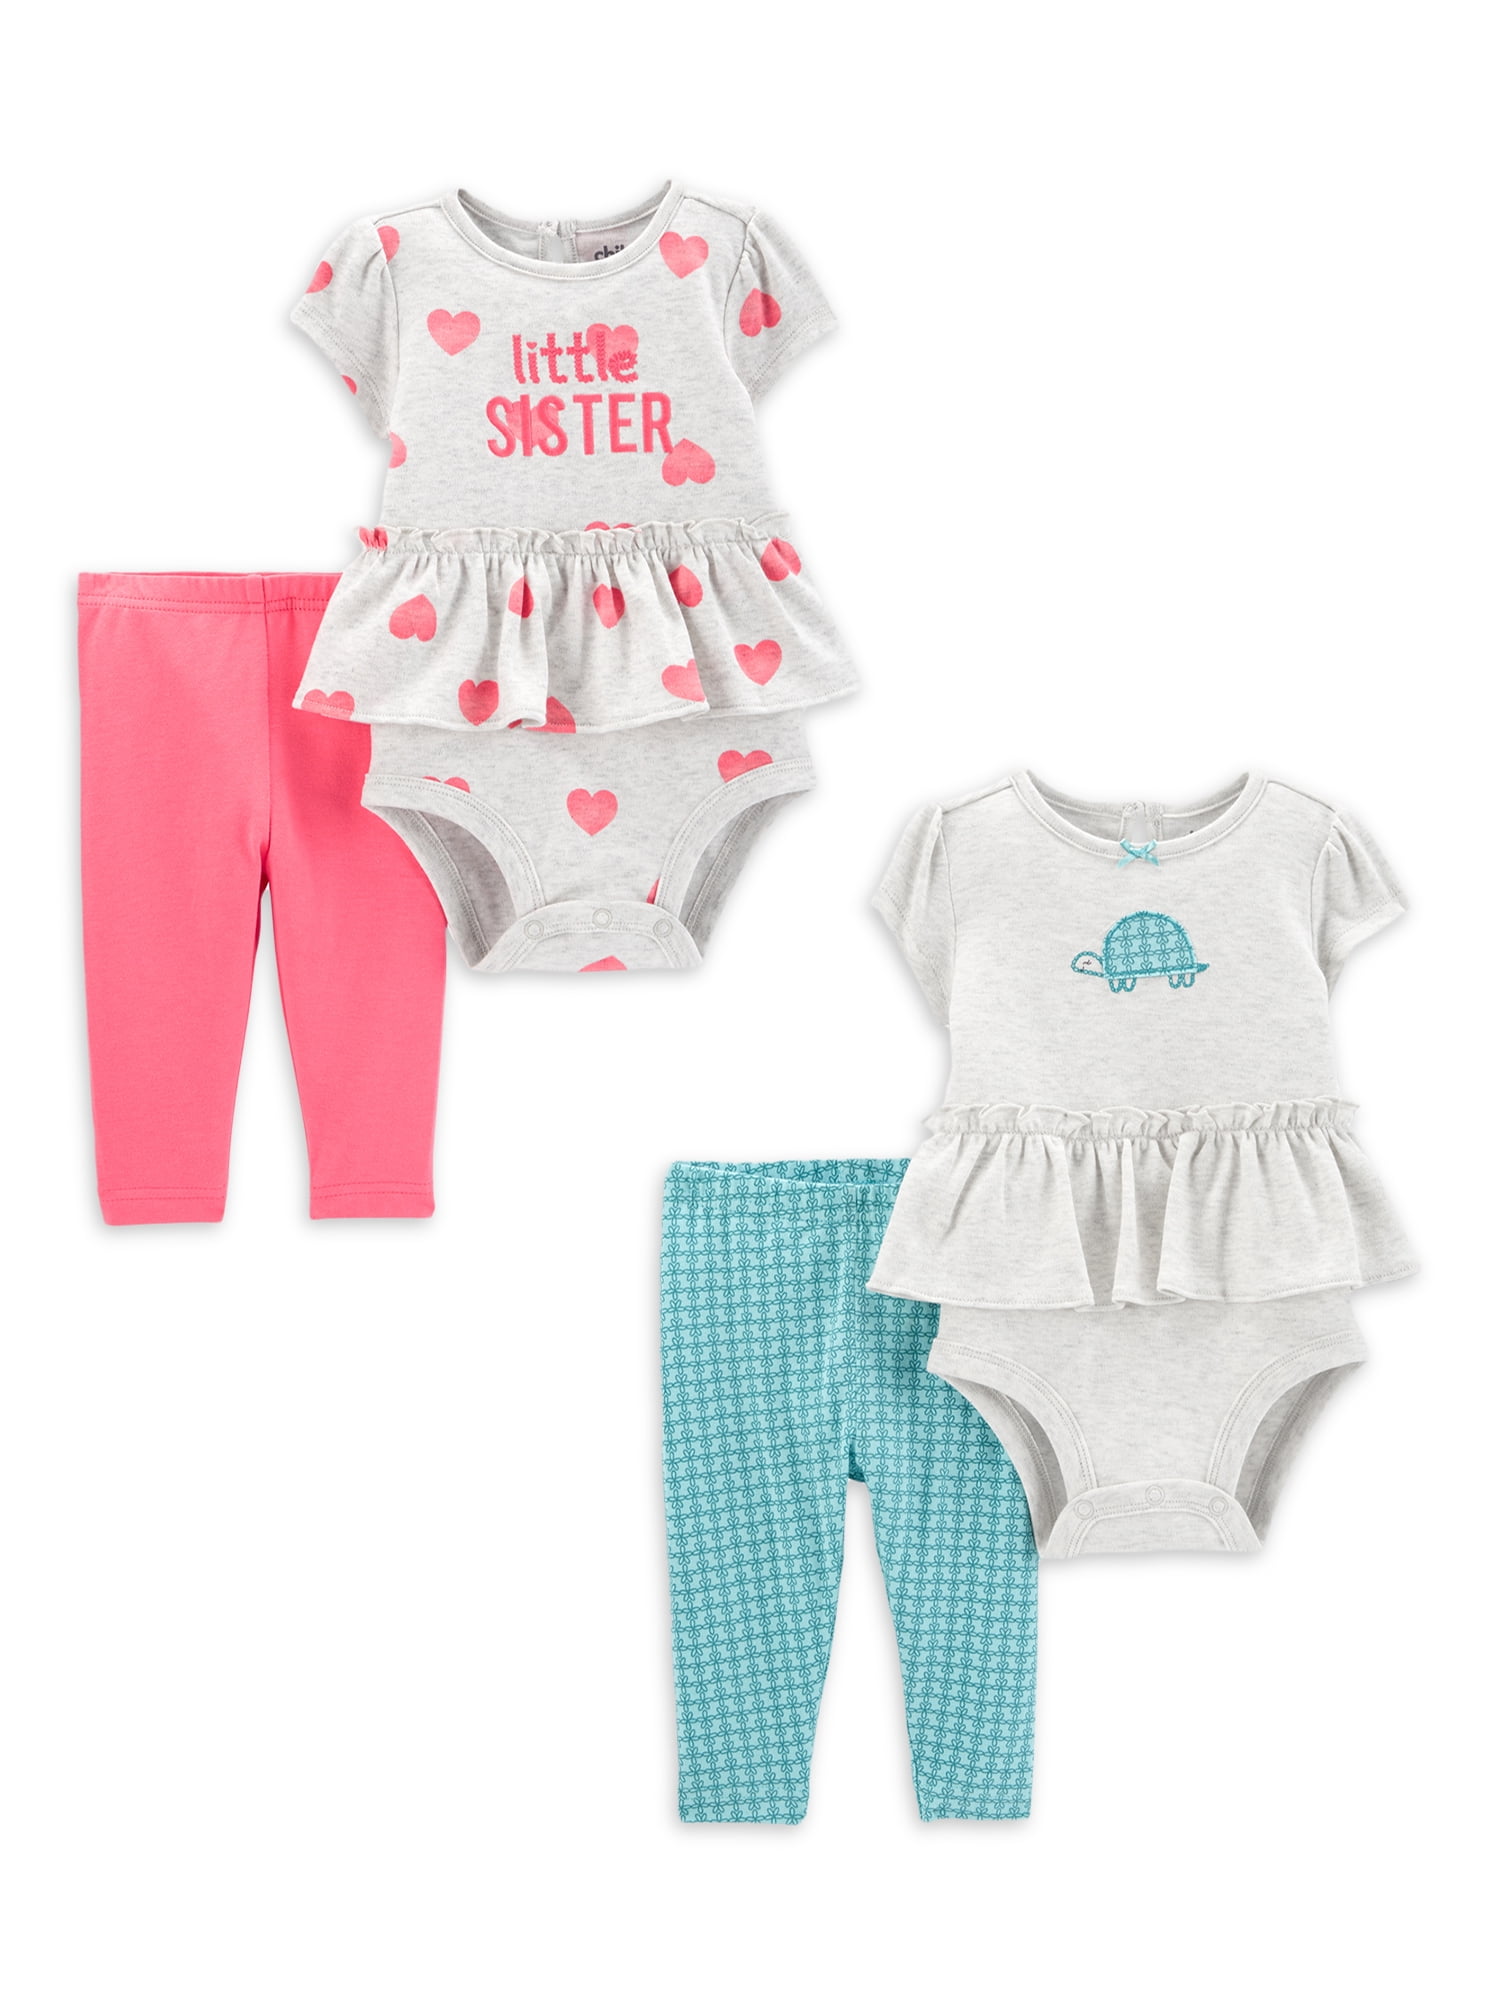 Carter's Child of Mine Baby Girl Short Sleeve Ruffle Bodysuit and Pant  Outfit Set, 4 pc Set, 0/3 Months - 24 Months - Walmart.com